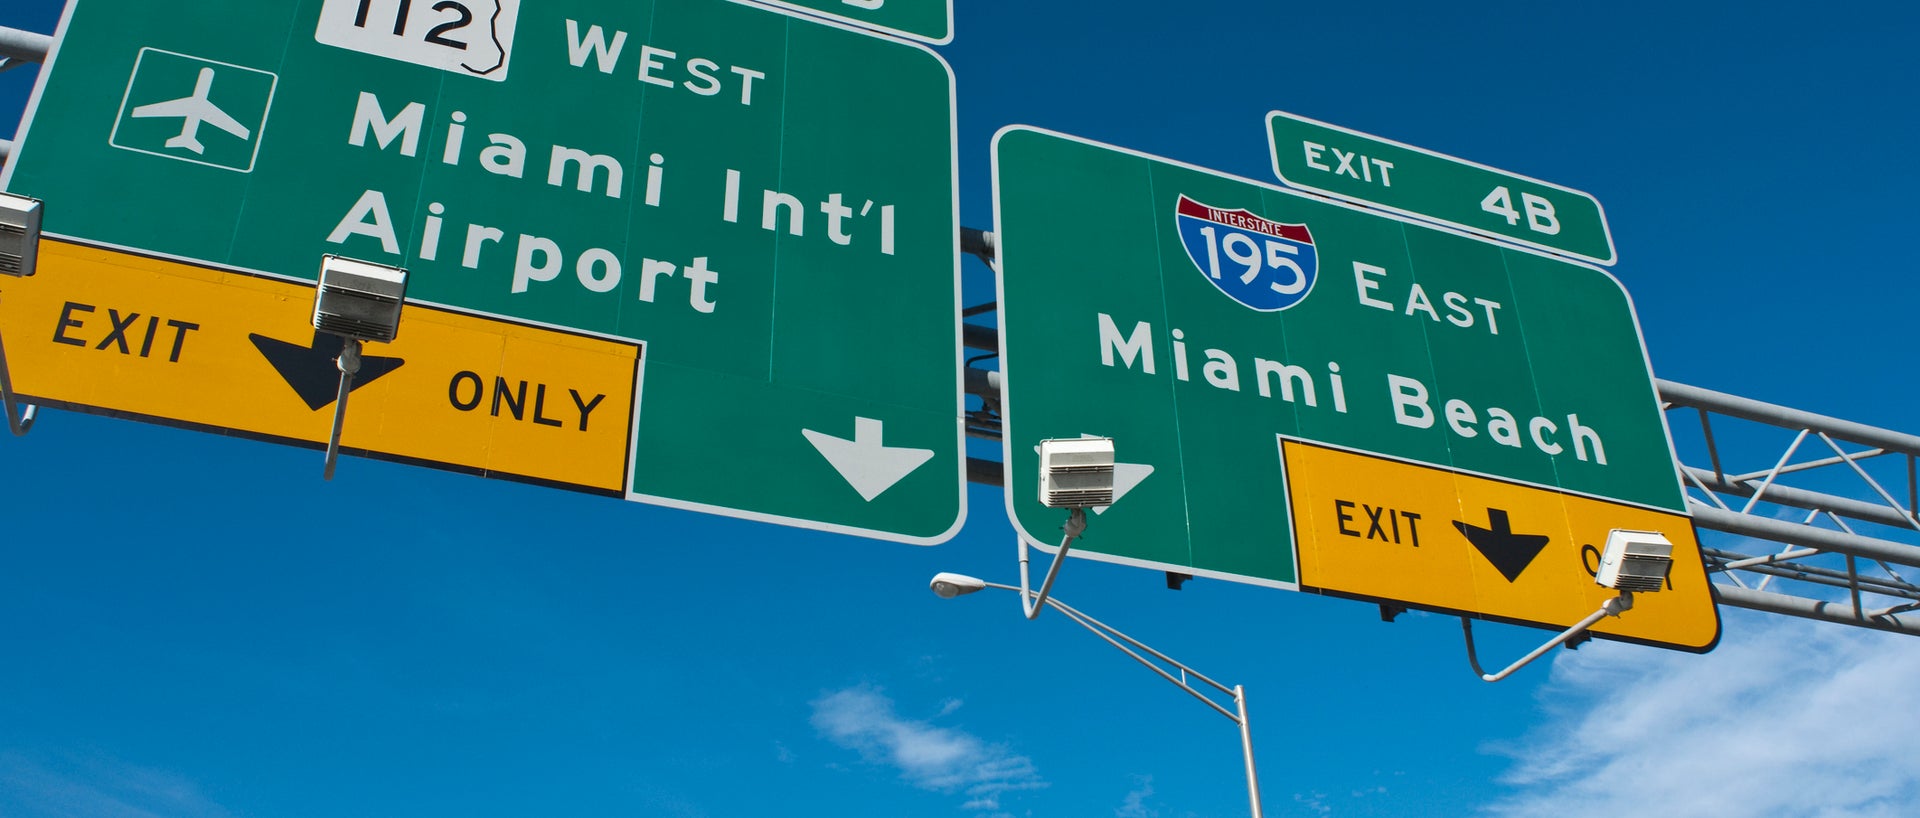 Sign showing Miami Intl Airport and Miami Beach